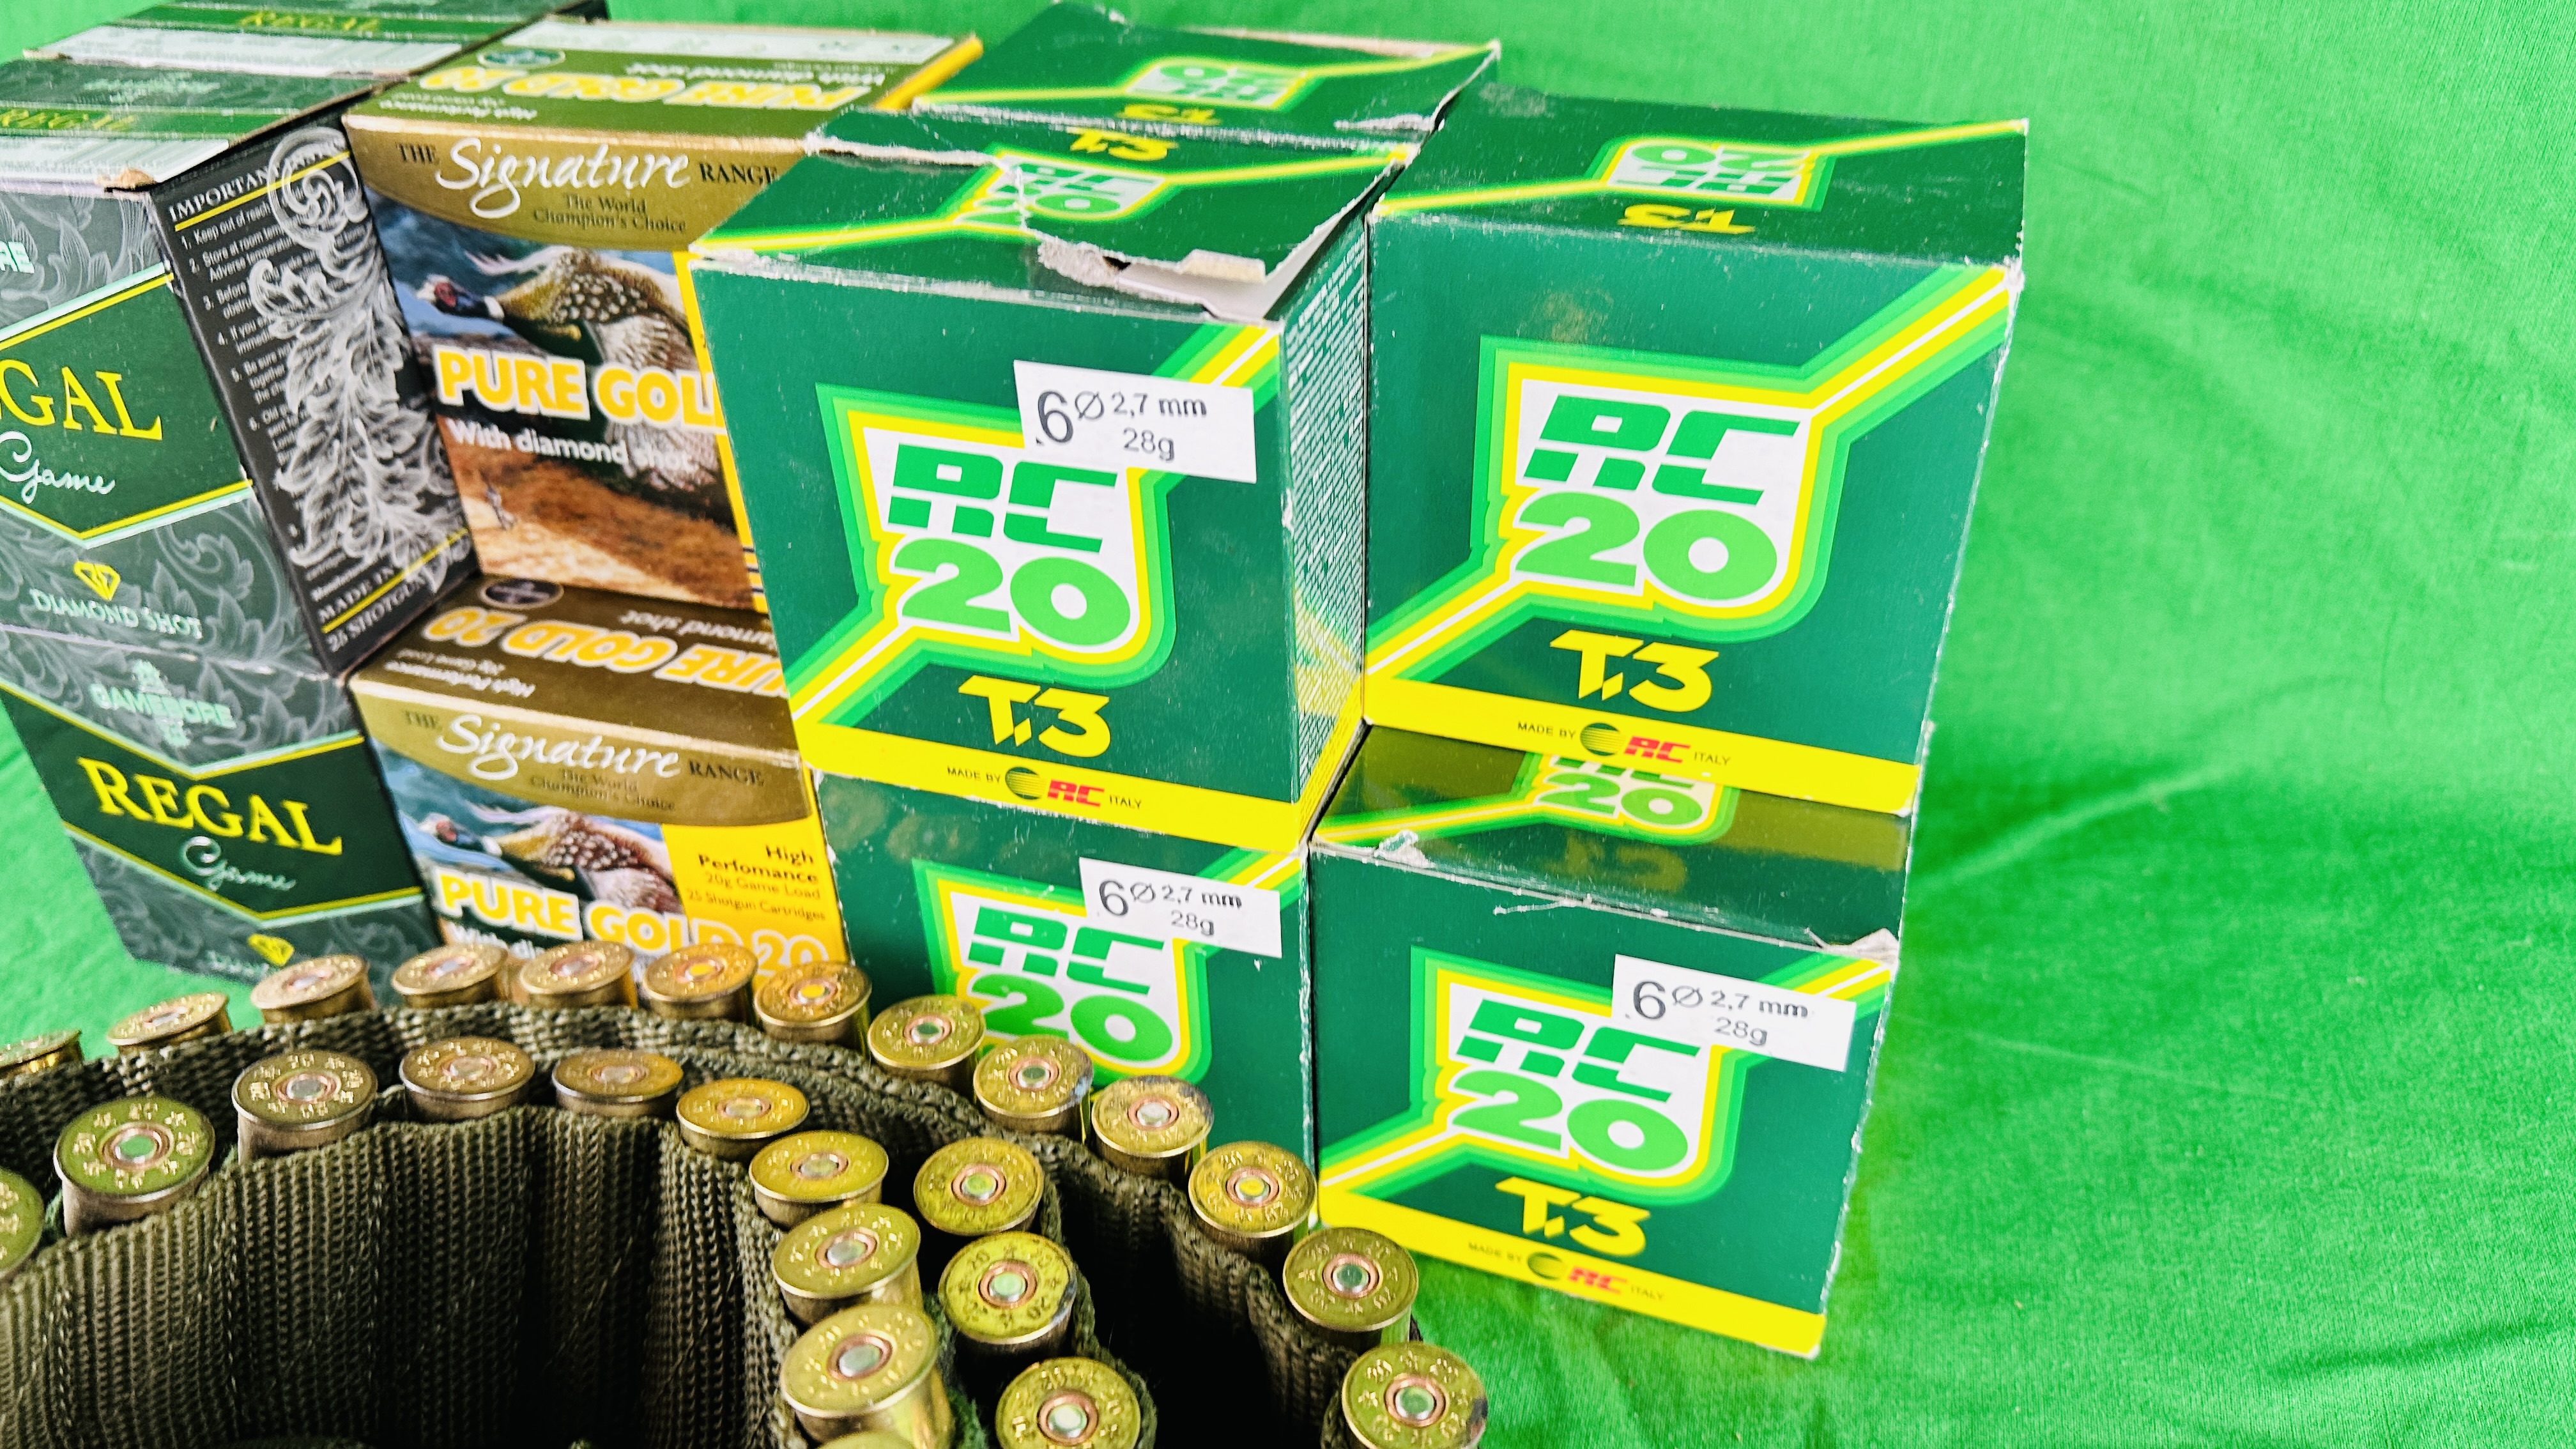 350 X 20 GAUGE CARTRIDGES TO INCLUDE RC 20 T3 28GRM 6 SHOT, PURE GOLD 20 6 SHOT 28GRM, - Image 7 of 8